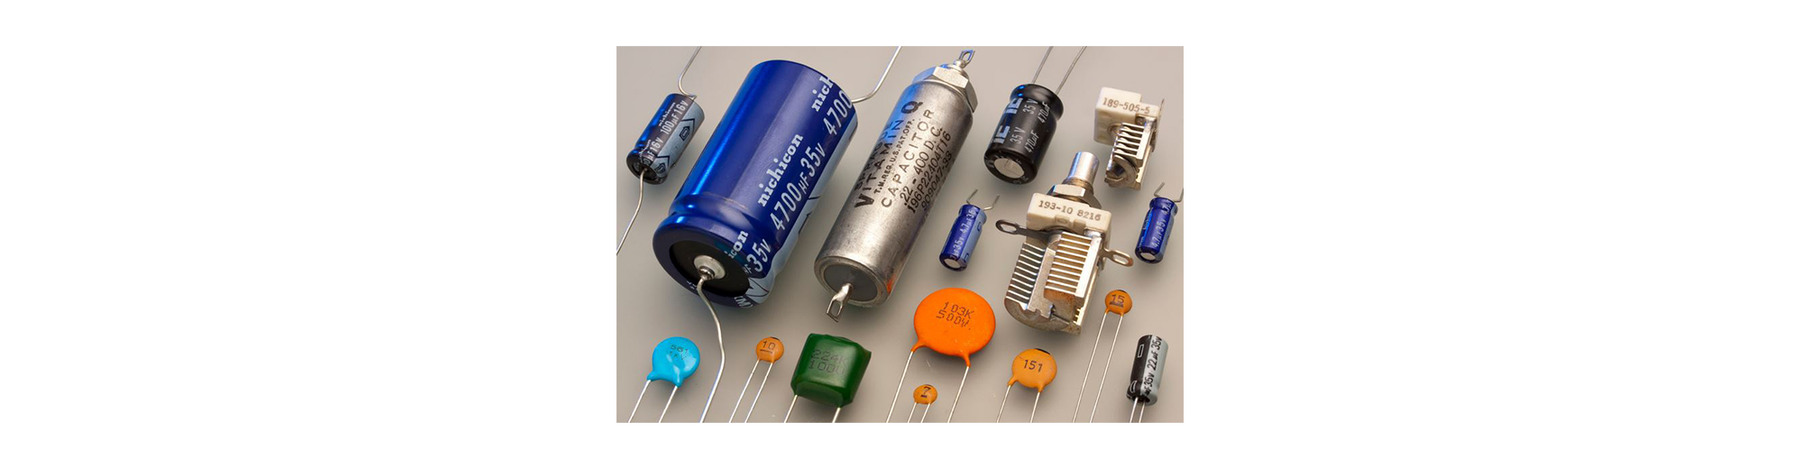 Authentic and Affordable Electronic Components